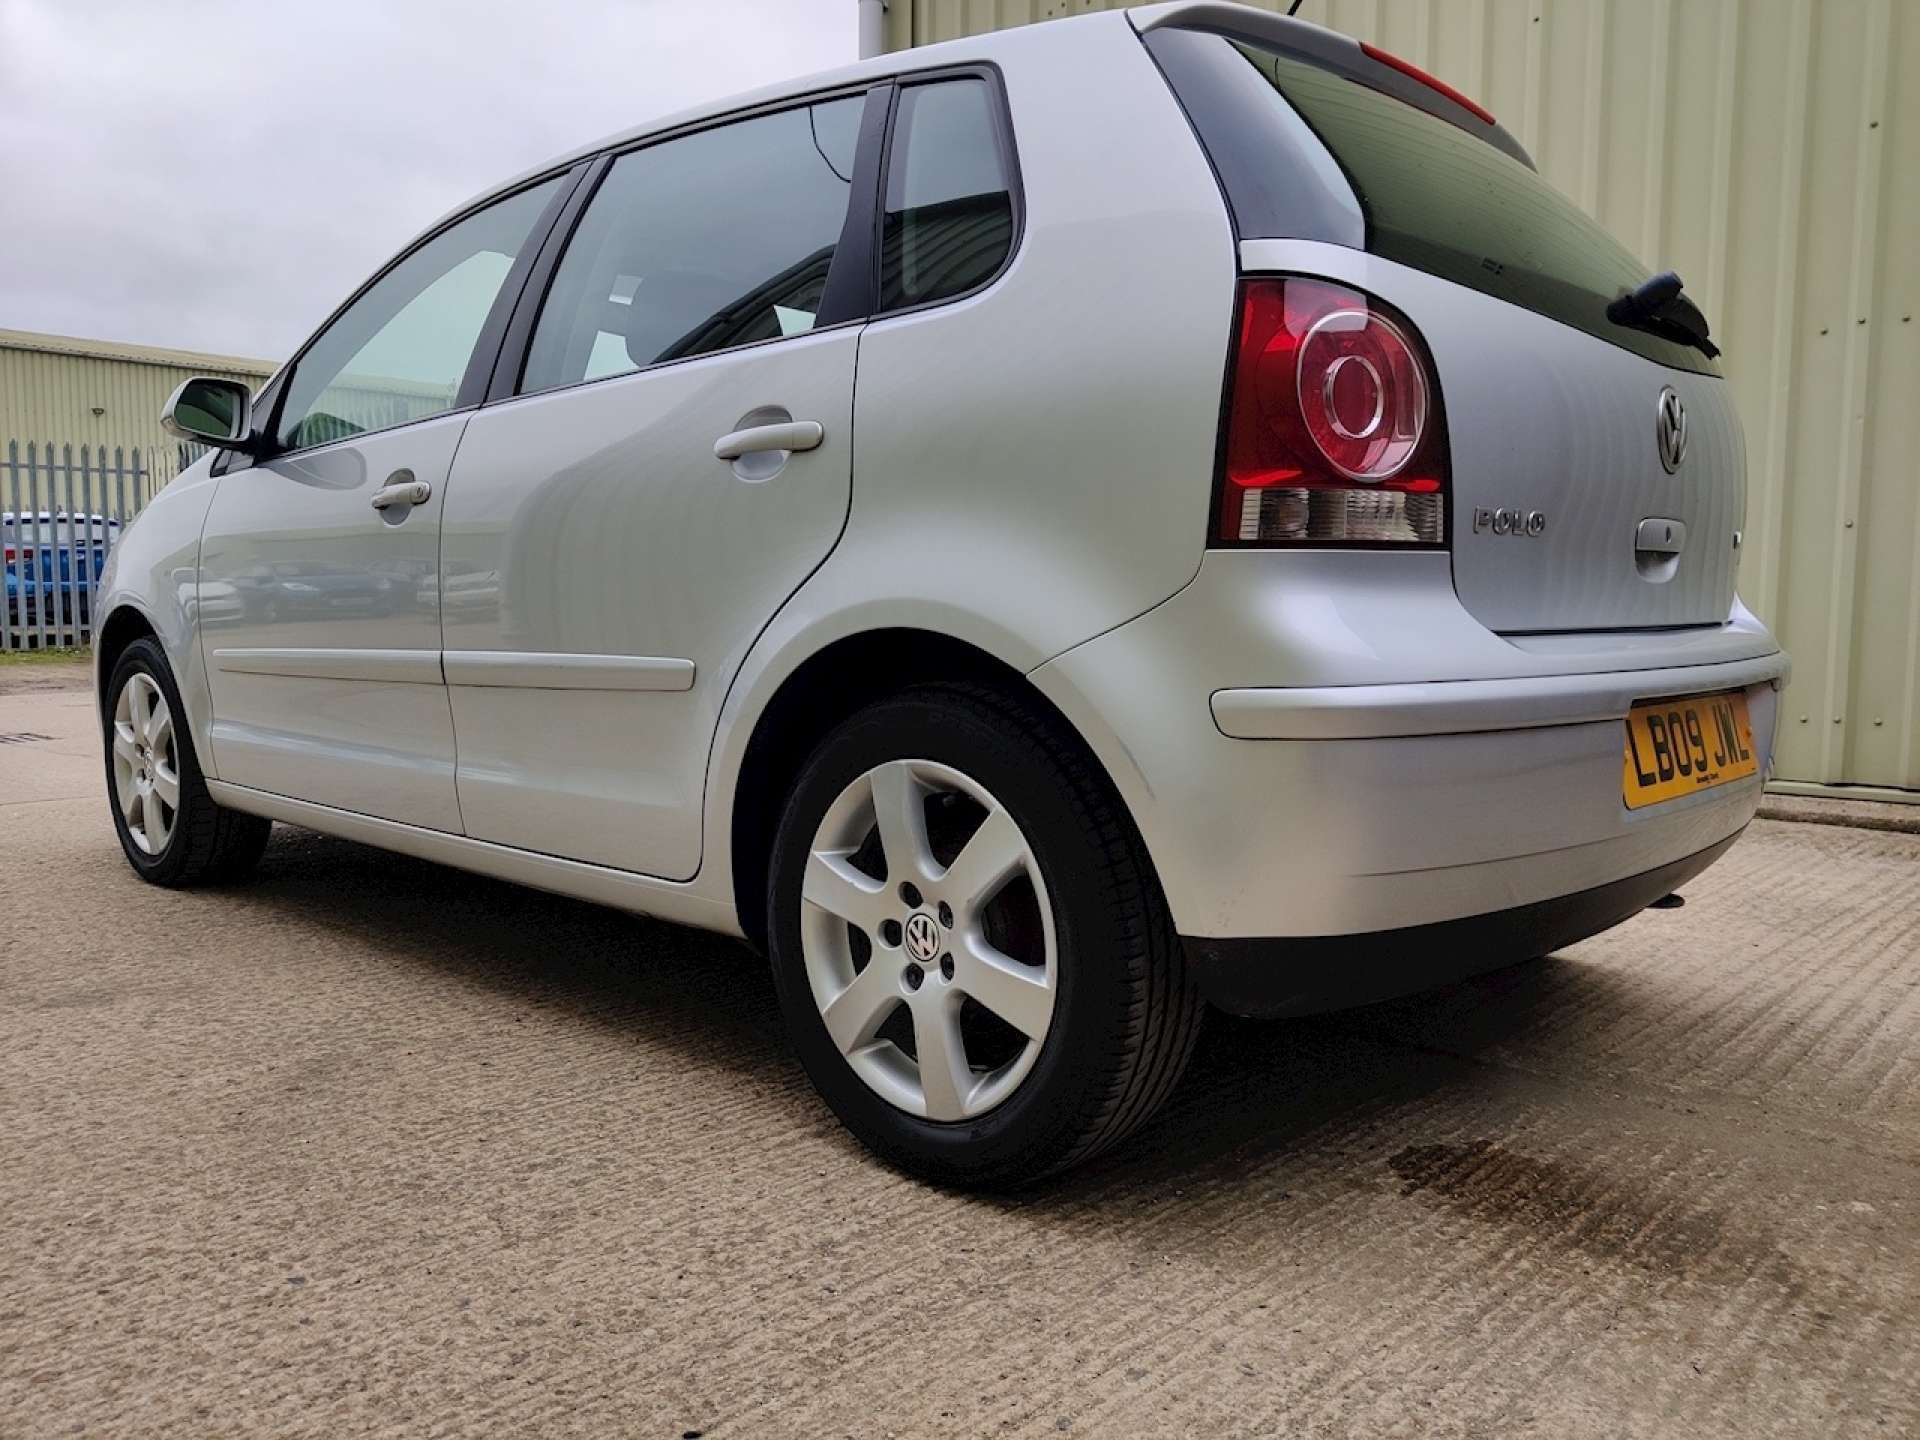 Used Volkswagen Polo for sale in Bassingbourn, Hertfordshire